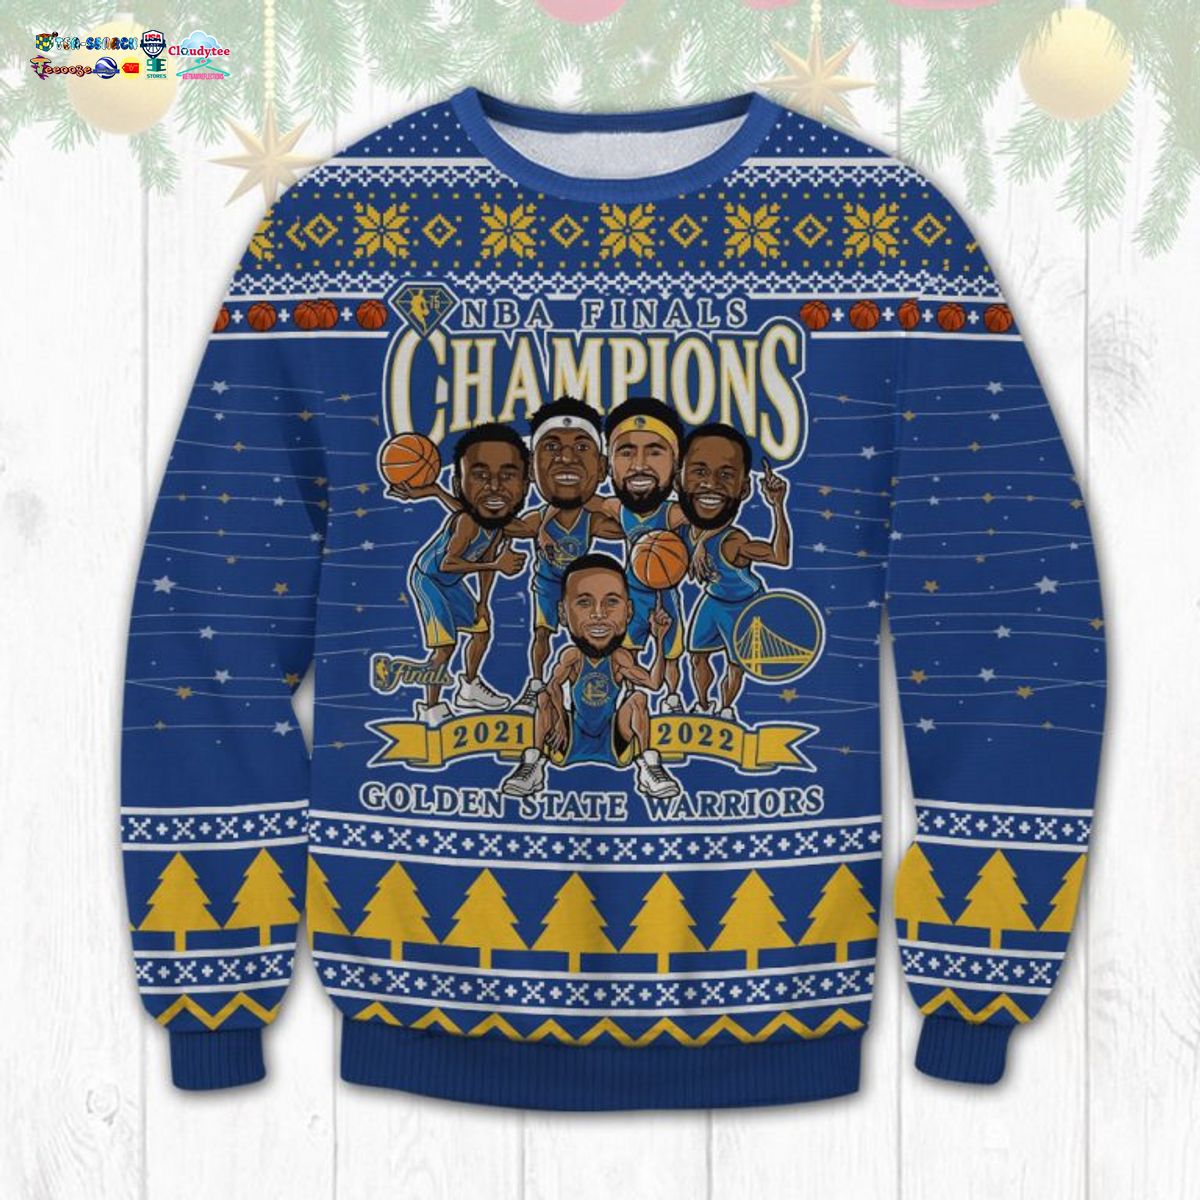 NBA Finals Champions 2021-2022 Golden State Warriors Ugly Christmas Sweater